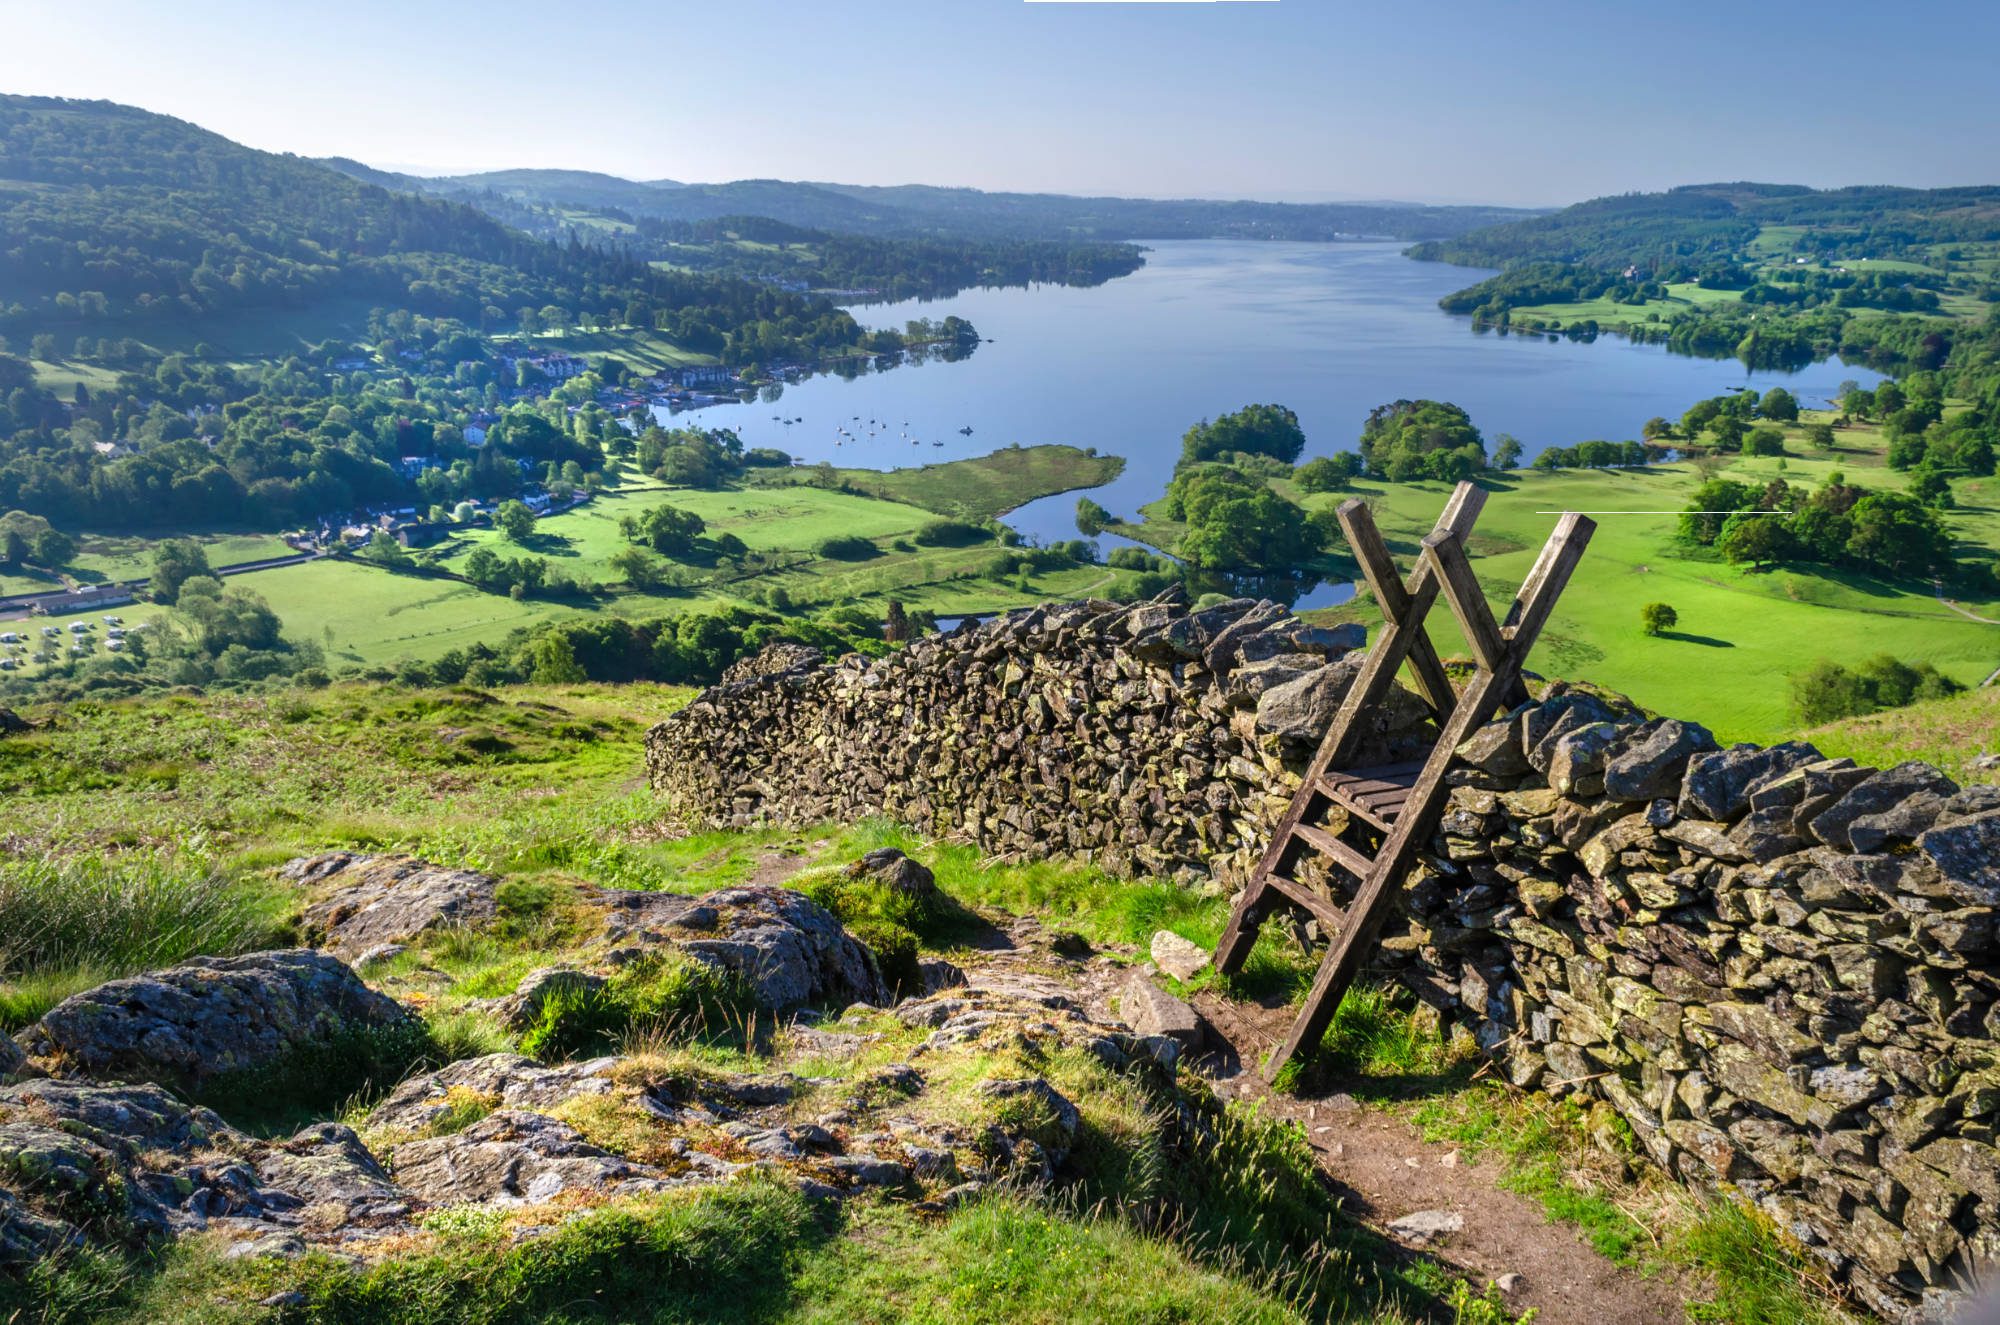 Lake Windermere from above